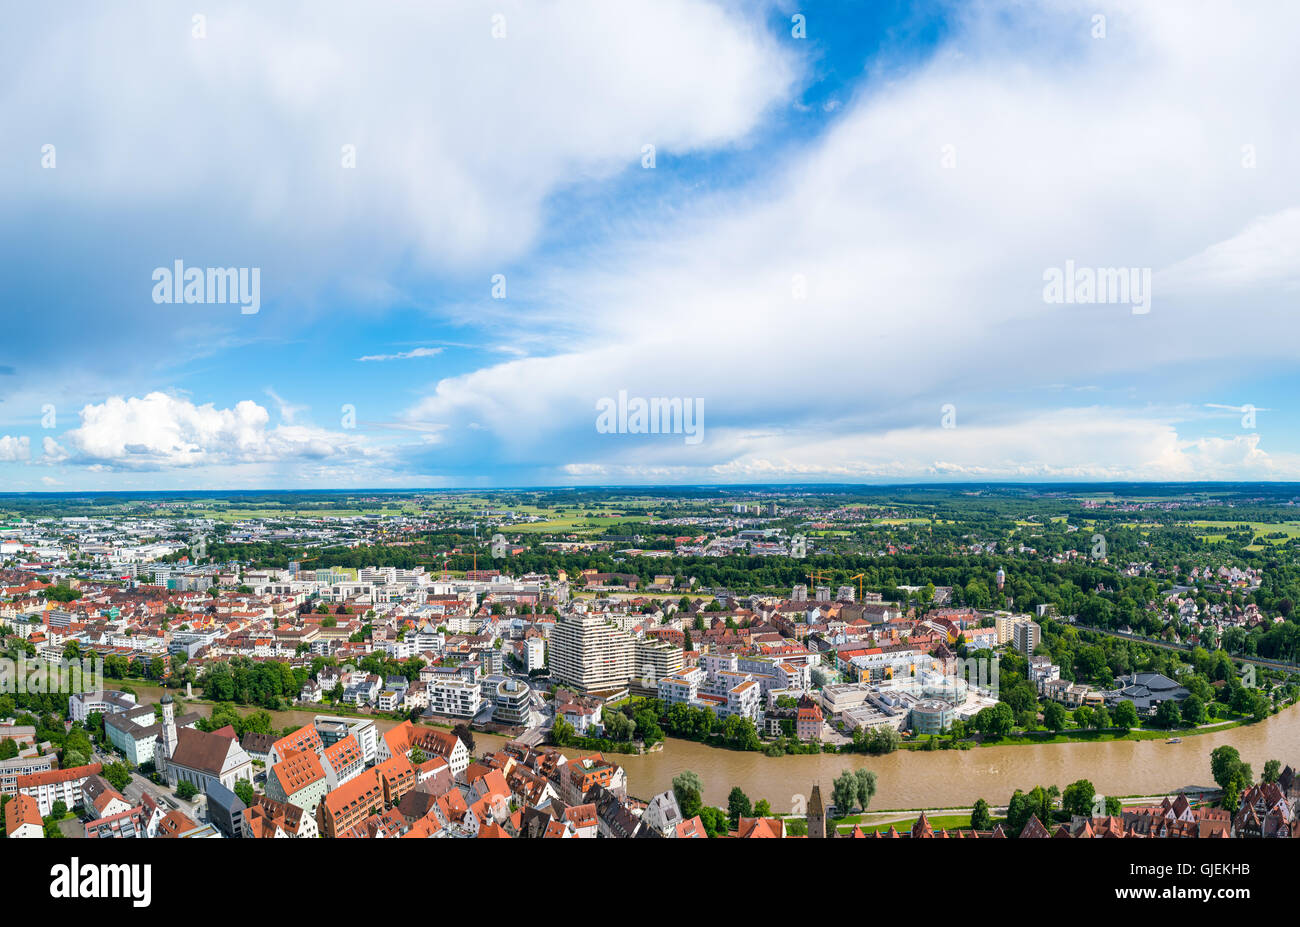 ULM, GERMANY - JUNE 18, 2016: Ulm and Danube river bird view, Germany. Ulm is primarily known for having the tallest church in t Stock Photo